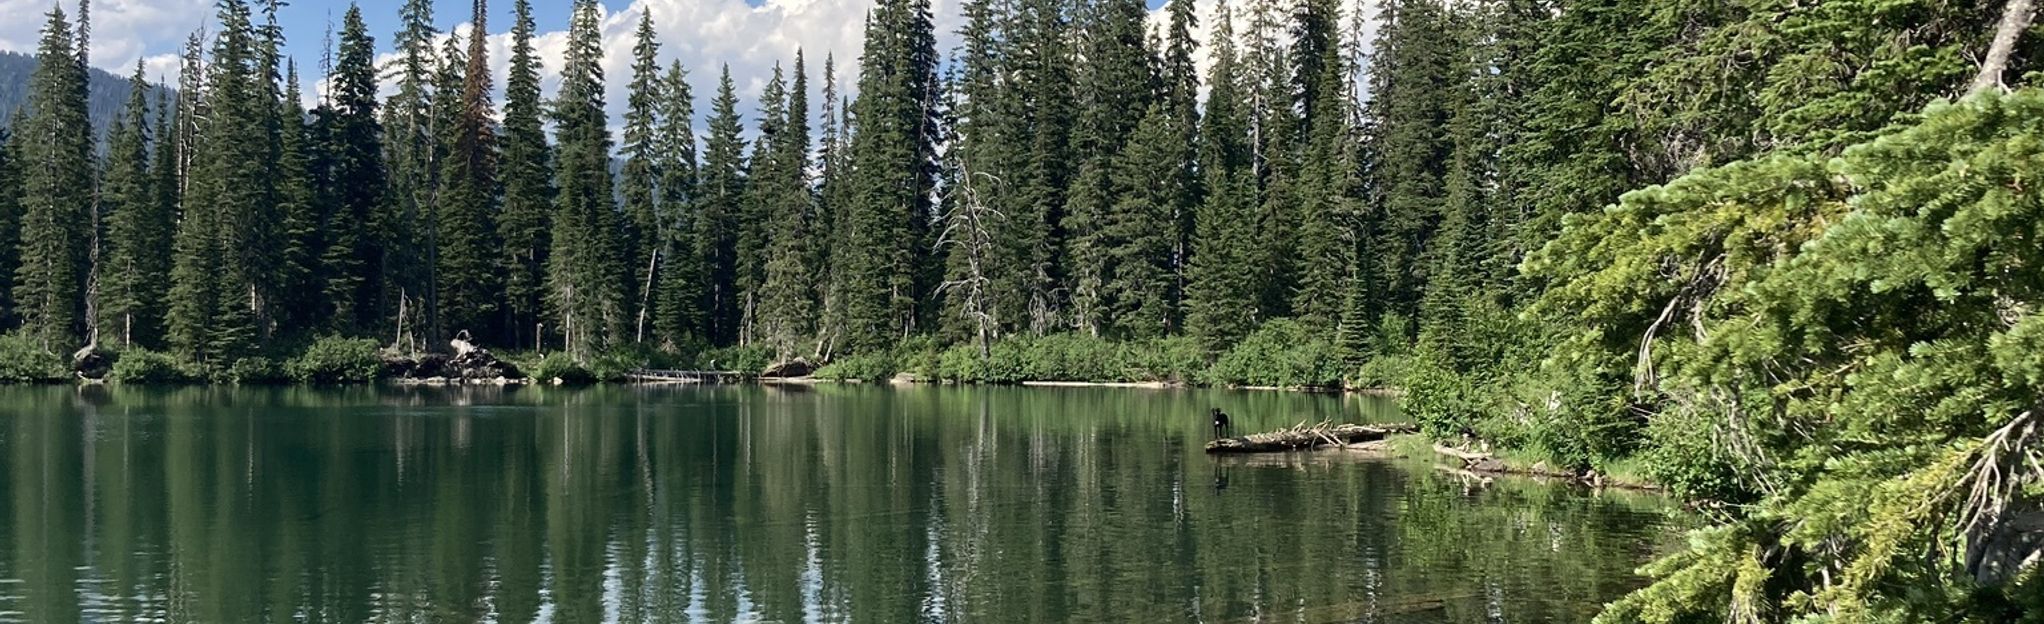 Little Therriault Lake Trail, Montana - 15 Reviews, Map | AllTrails